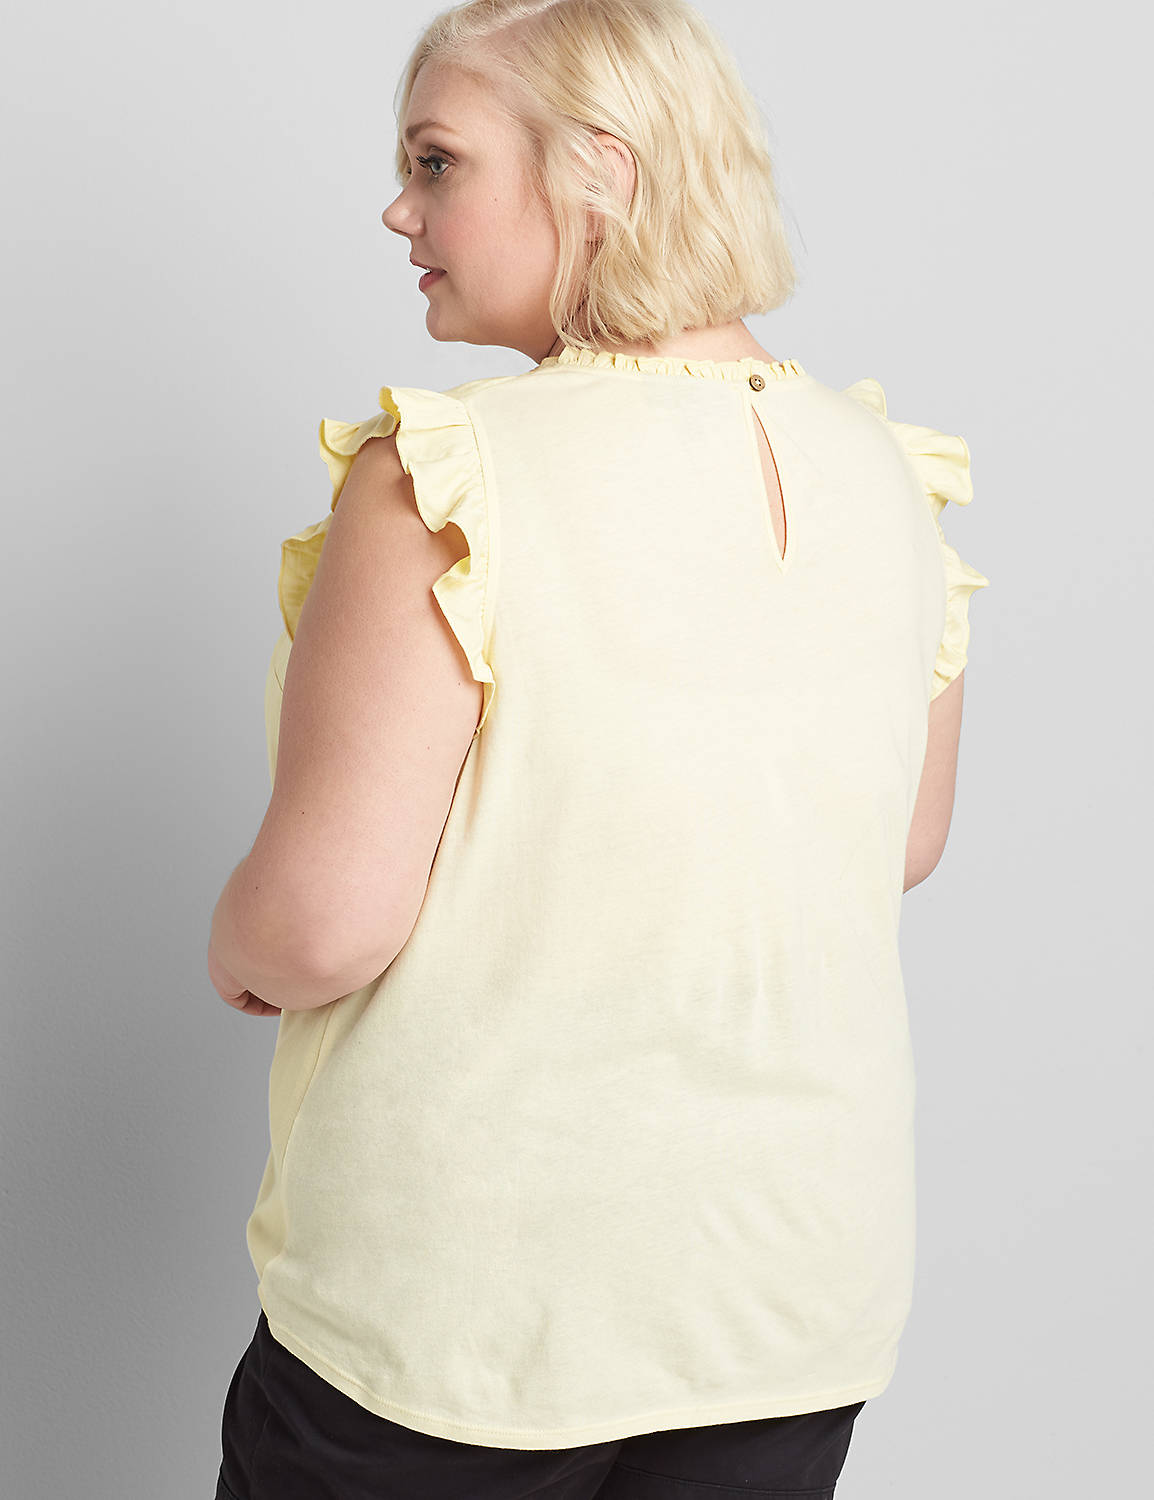 Sleeveless Crew Neck Embroidered Front Blouse 1121246:PANTONE Pale Banana:18 Product Image 2